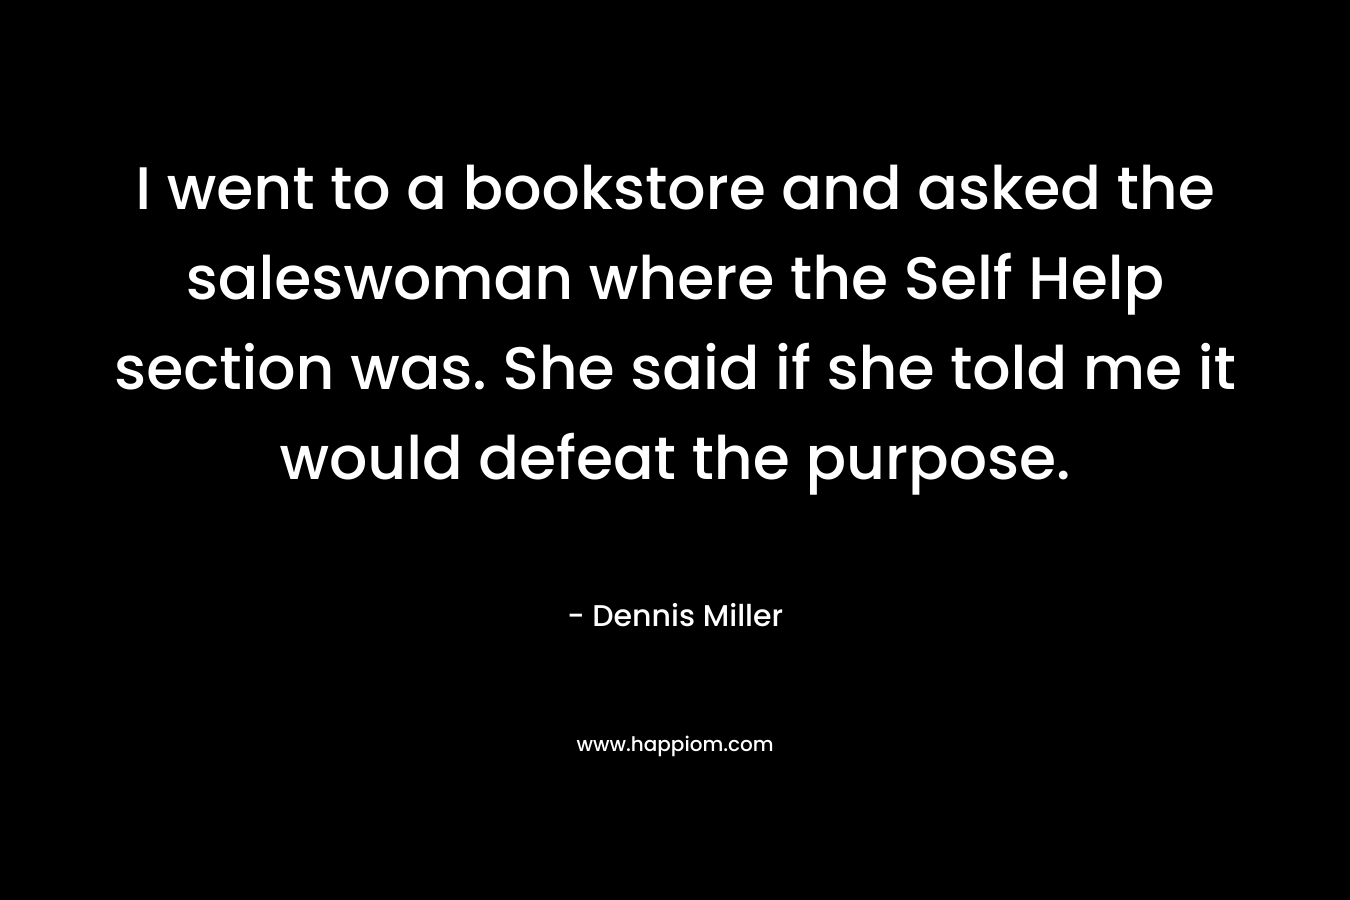 I went to a bookstore and asked the saleswoman where the Self Help section was. She said if she told me it would defeat the purpose. – Dennis Miller